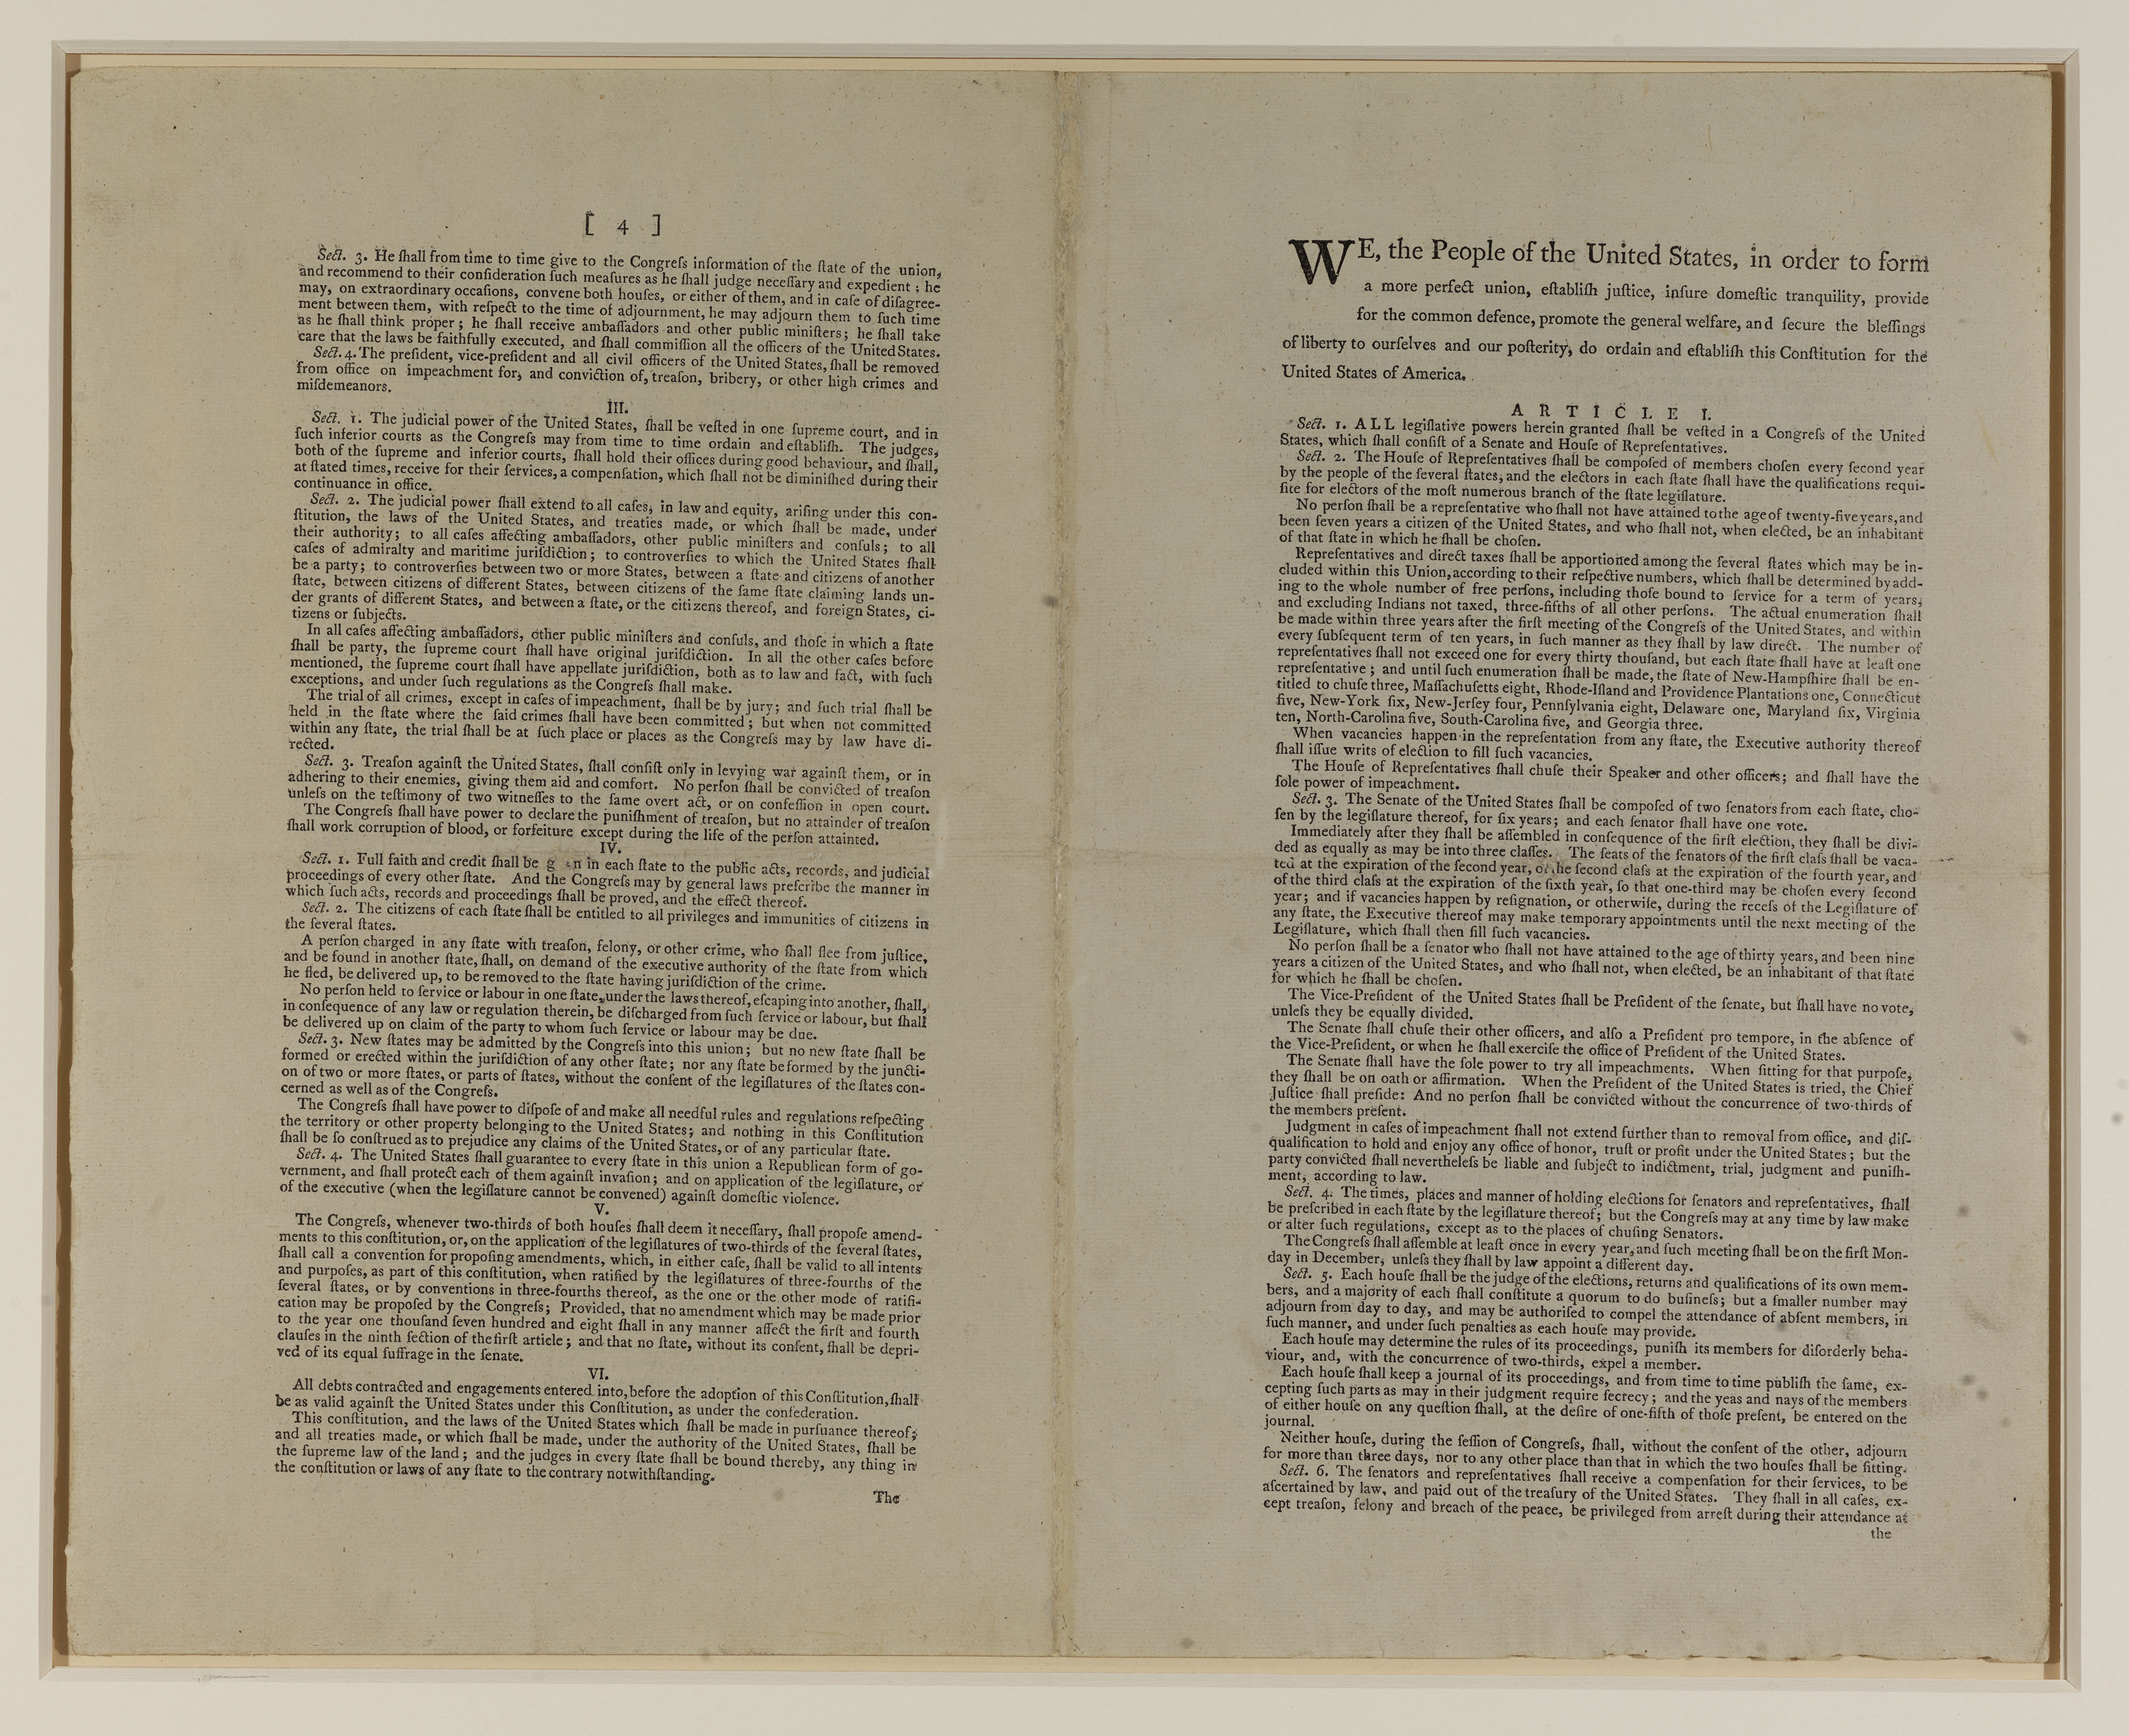 Official printing of the U.S. Constitution in 1787. Image from the National Constitution Center.